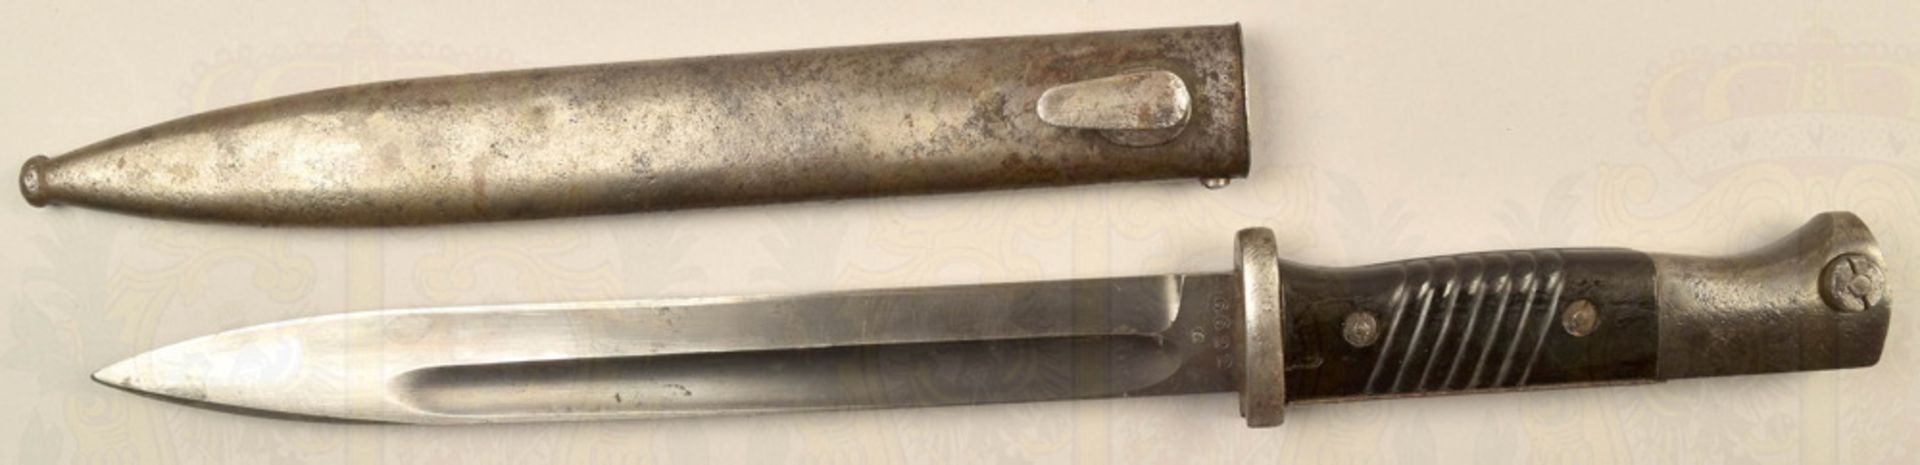 Bayonet pattern 84/98 manufactured in 1941 by Eickhorn